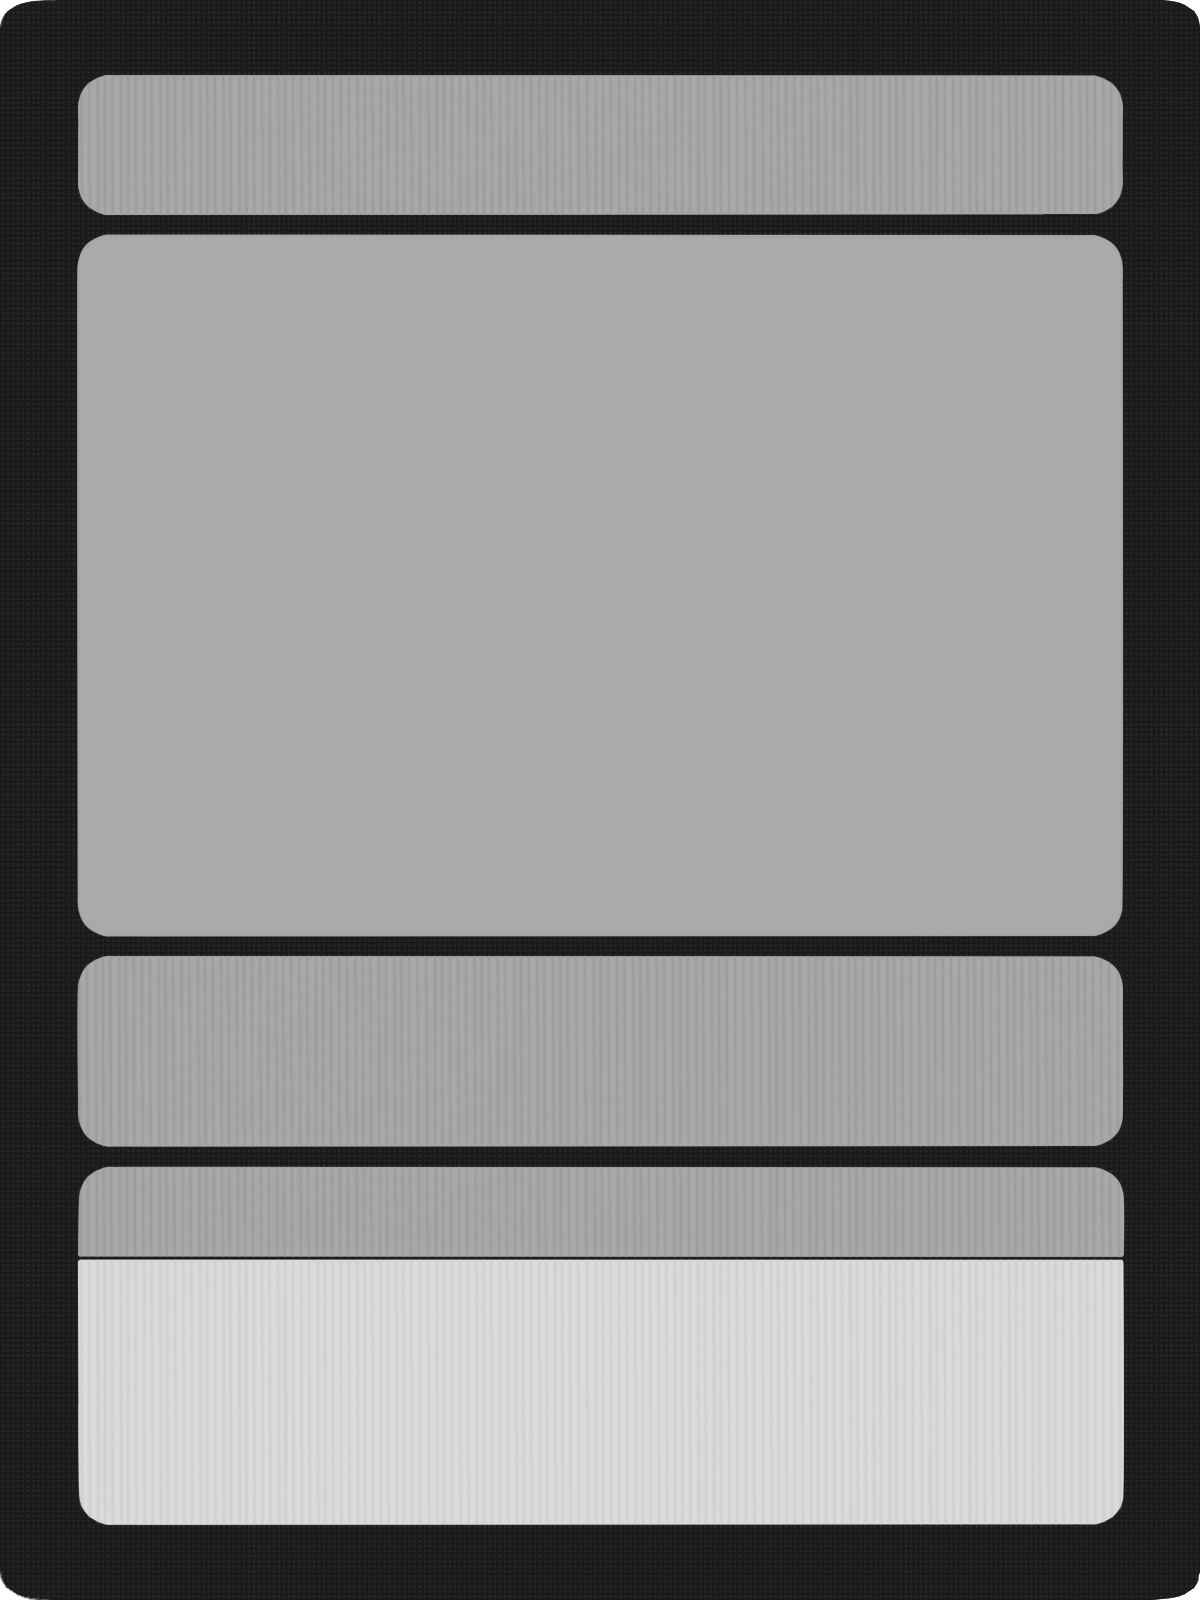 This Is A Free To Use Template For Those Wishing With Blank Magic Card Template